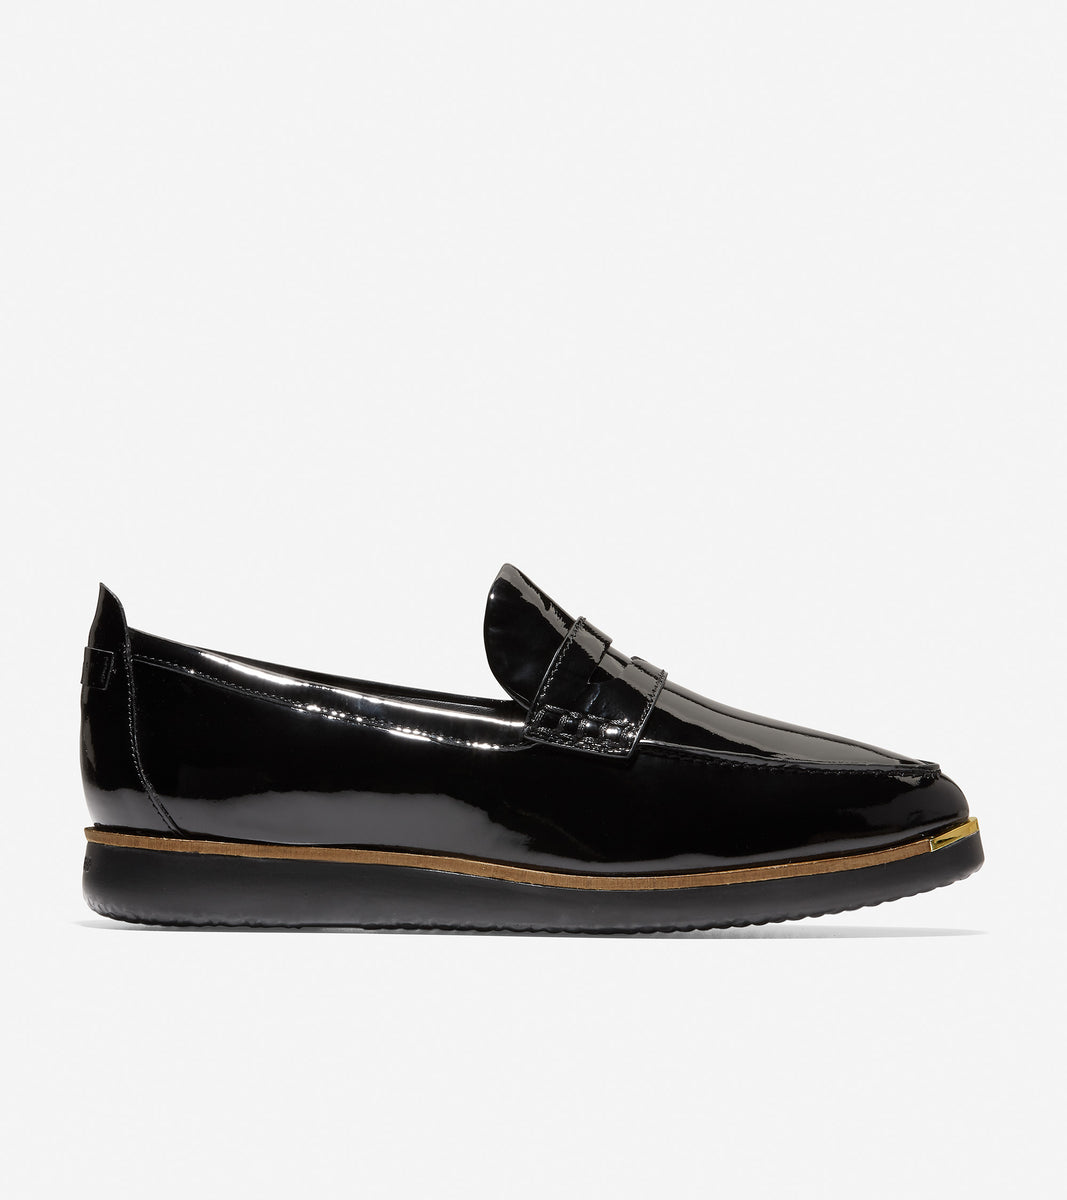 w22772-Grand Ambition Tolly Penny Loafer-Black Patent